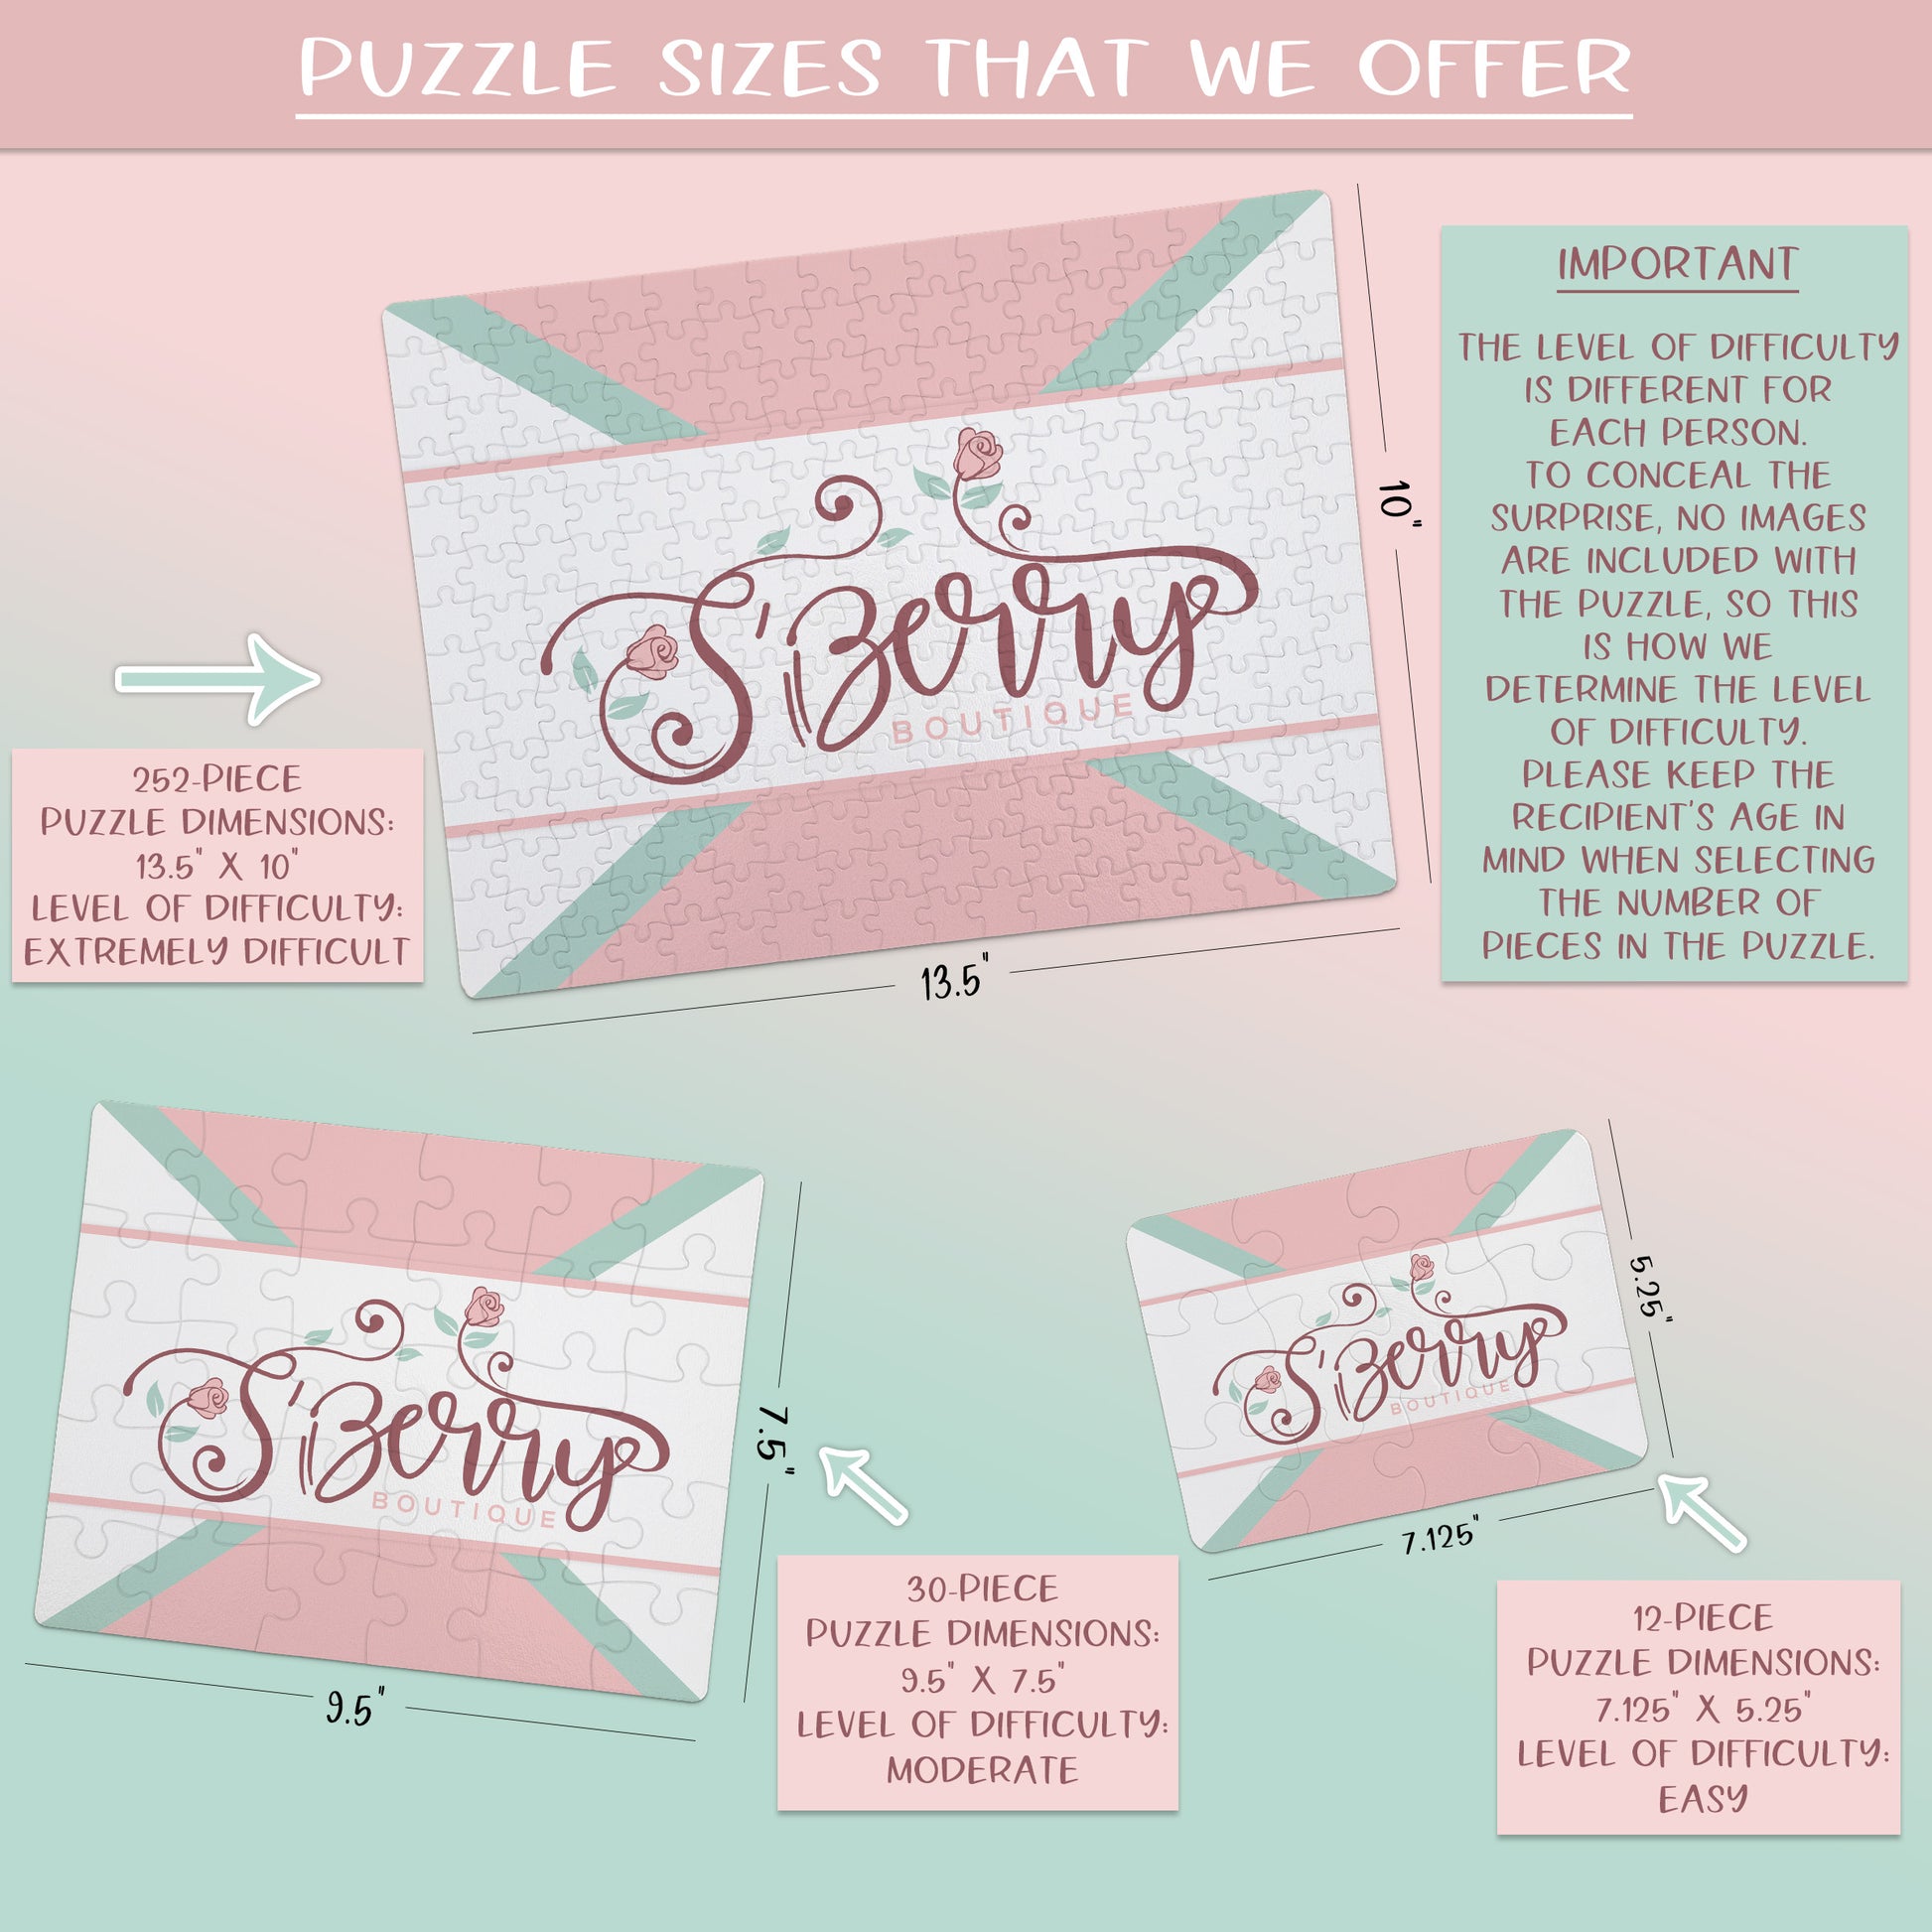 Create Your Own Puzzle - Arrow Design - CYOP0228 | S'Berry Boutique